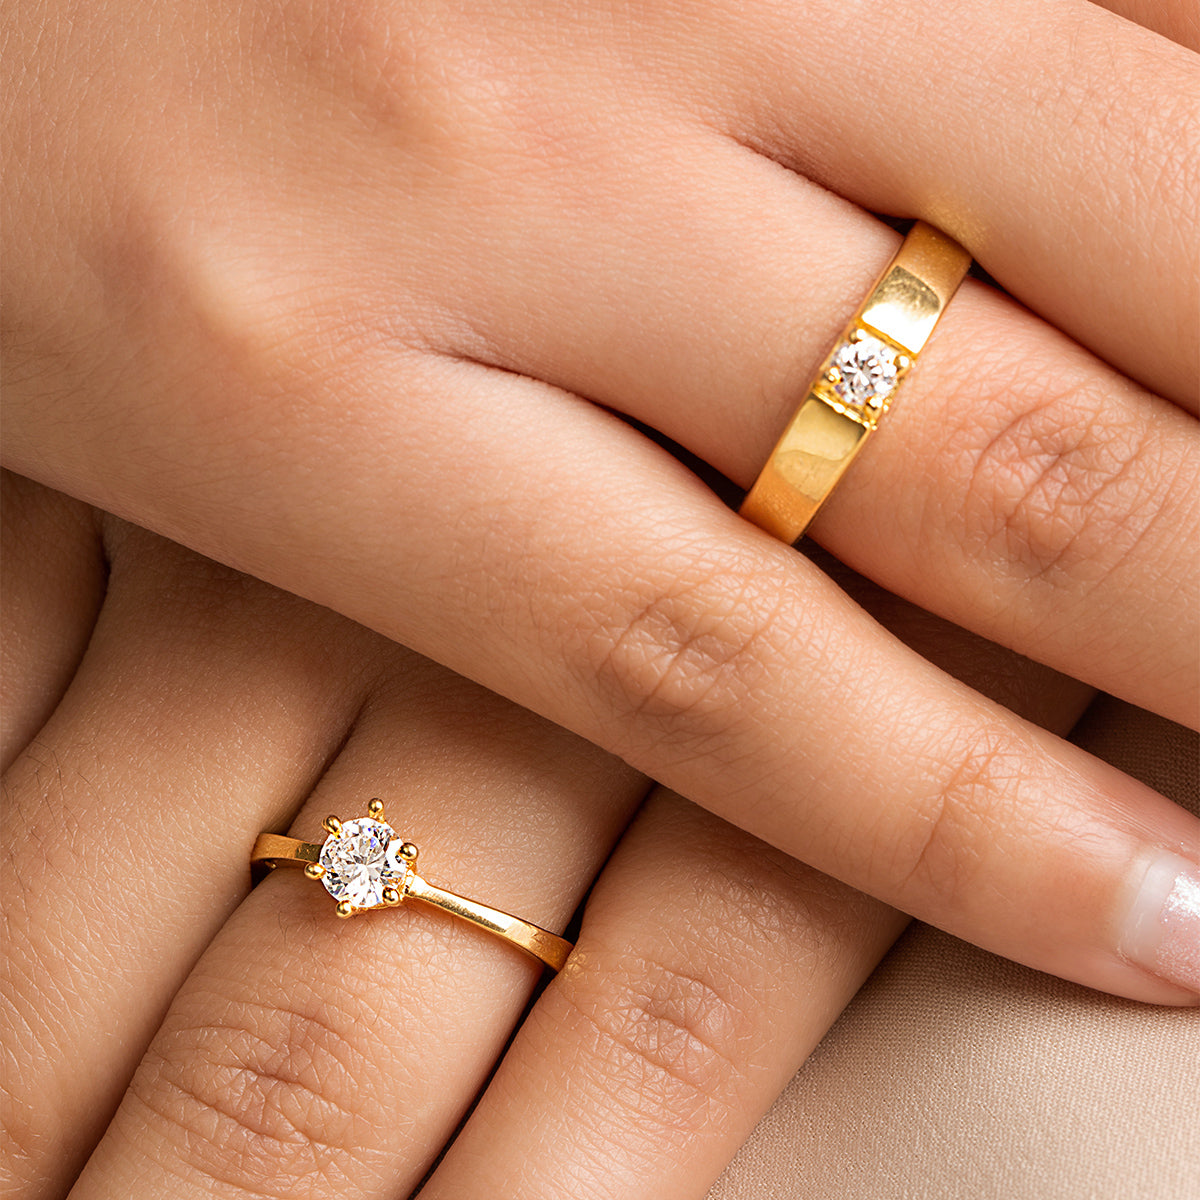 5 Ways To Pick The Perfect Wedding Ring For Your One & Only Love In The